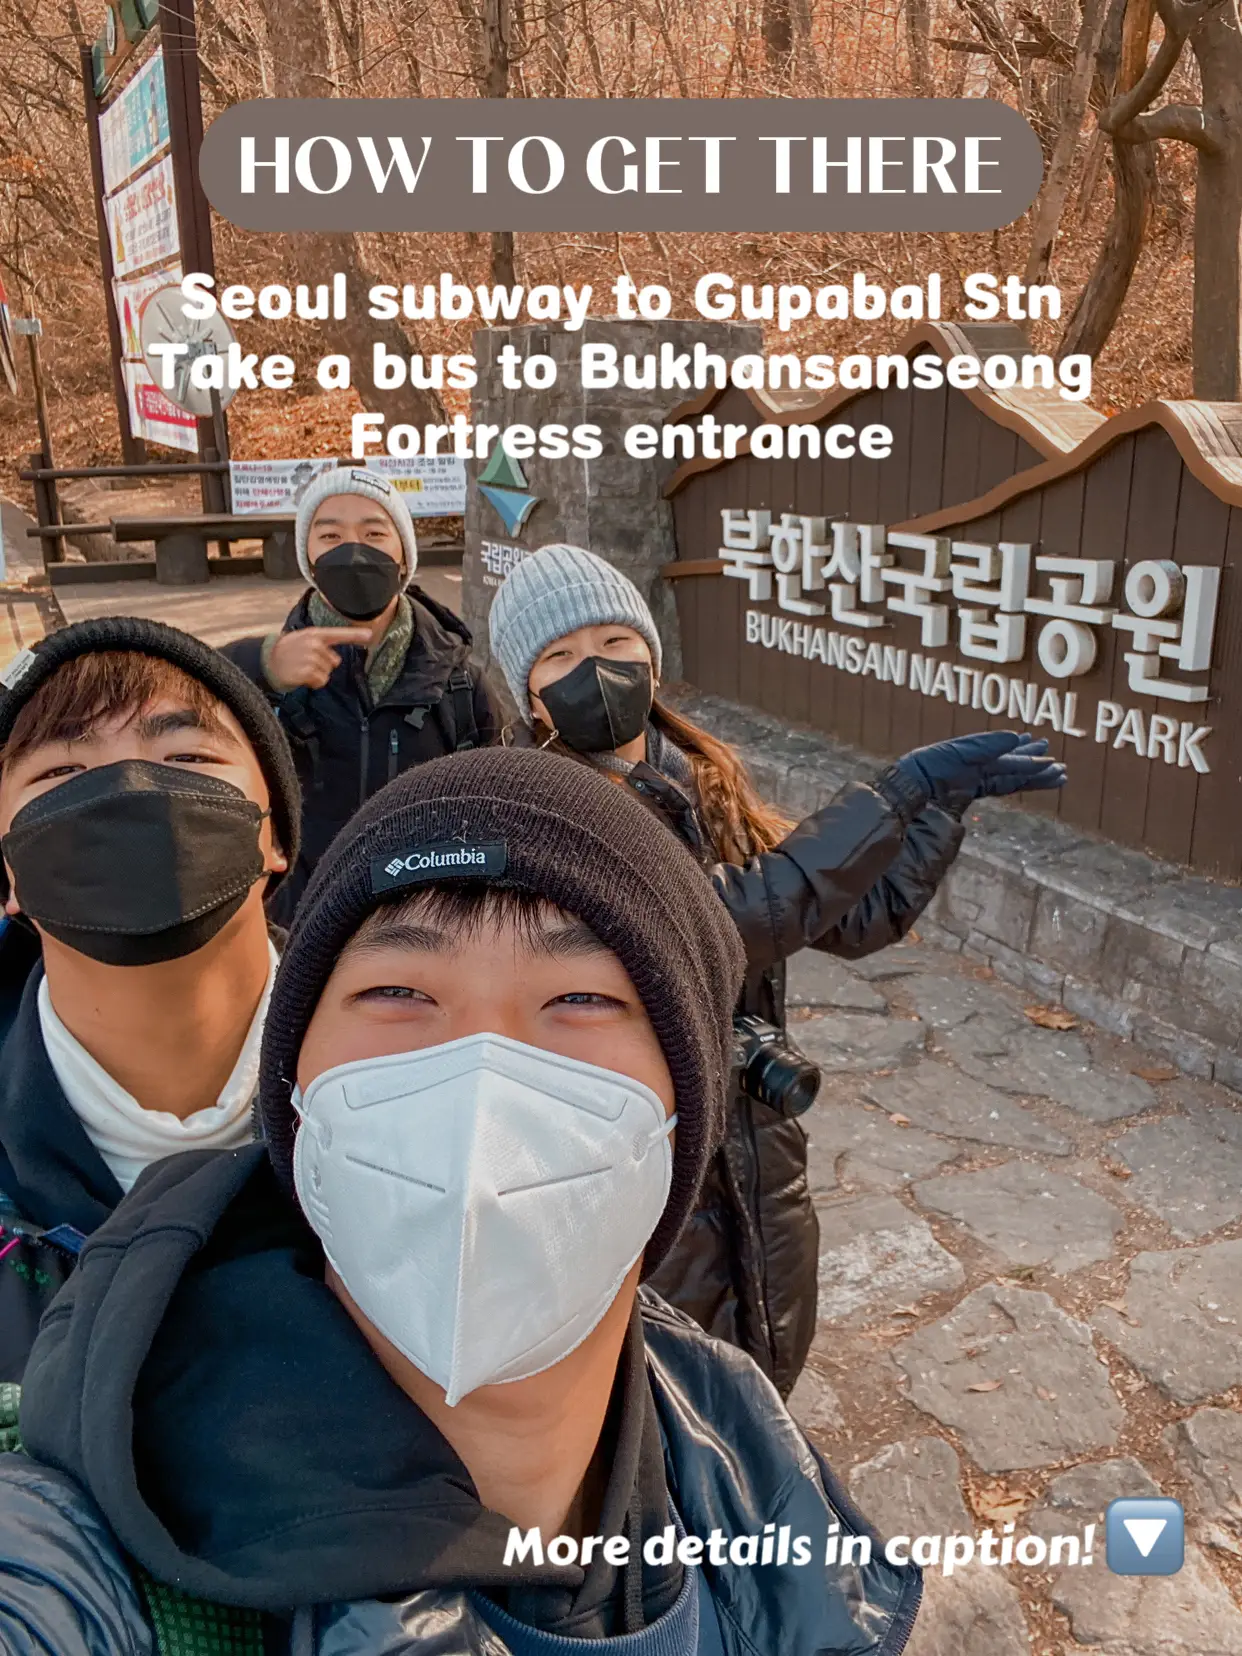 ULTIMATE GUIDE to seoul’s most popular hiking 🗻🇰🇷's images(1)